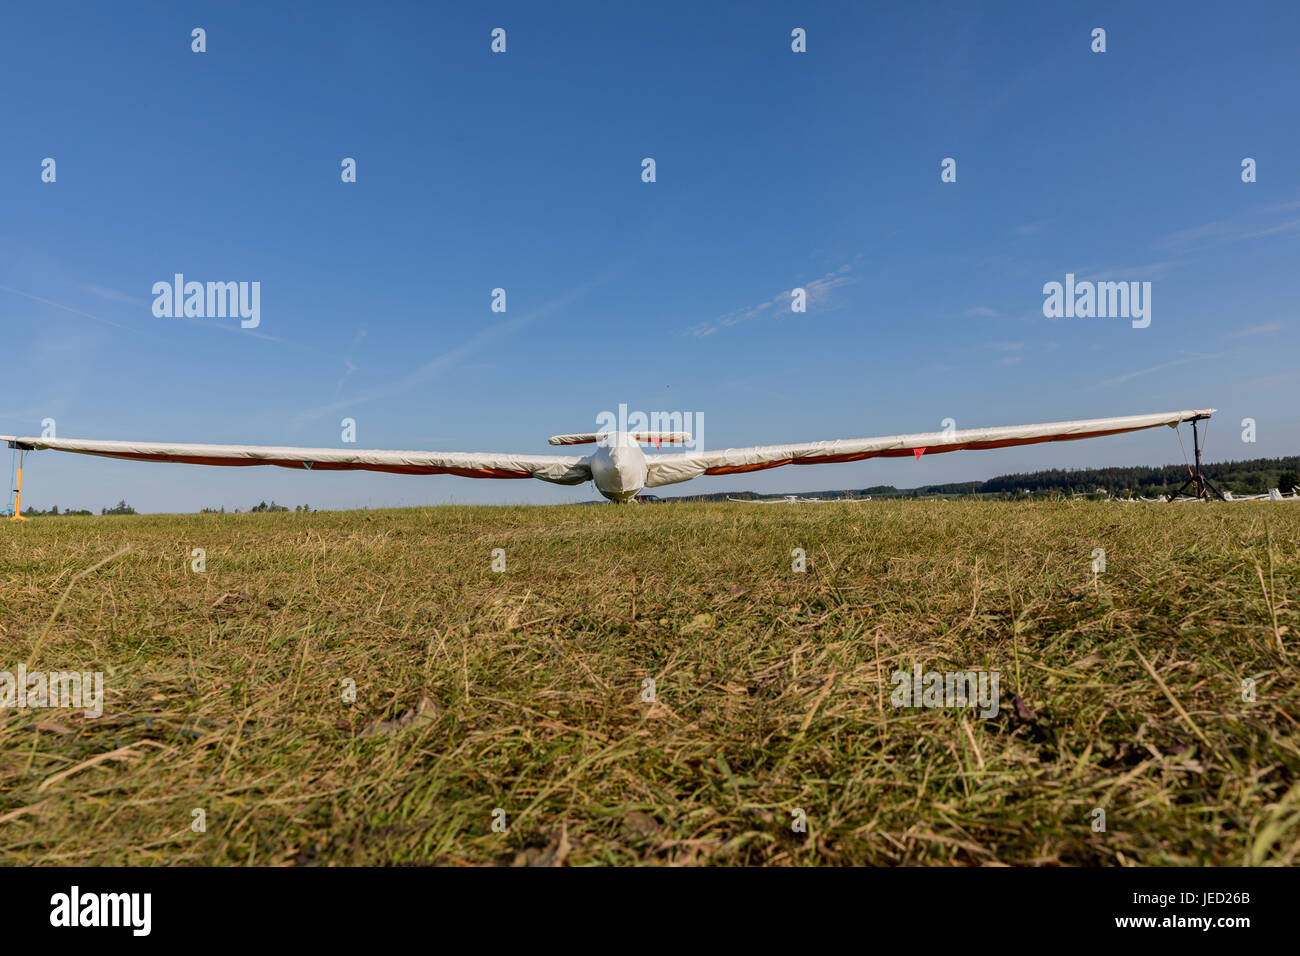 A glider with a protective sleeve parked on a grassy airport on a sunny day. Stock Photo